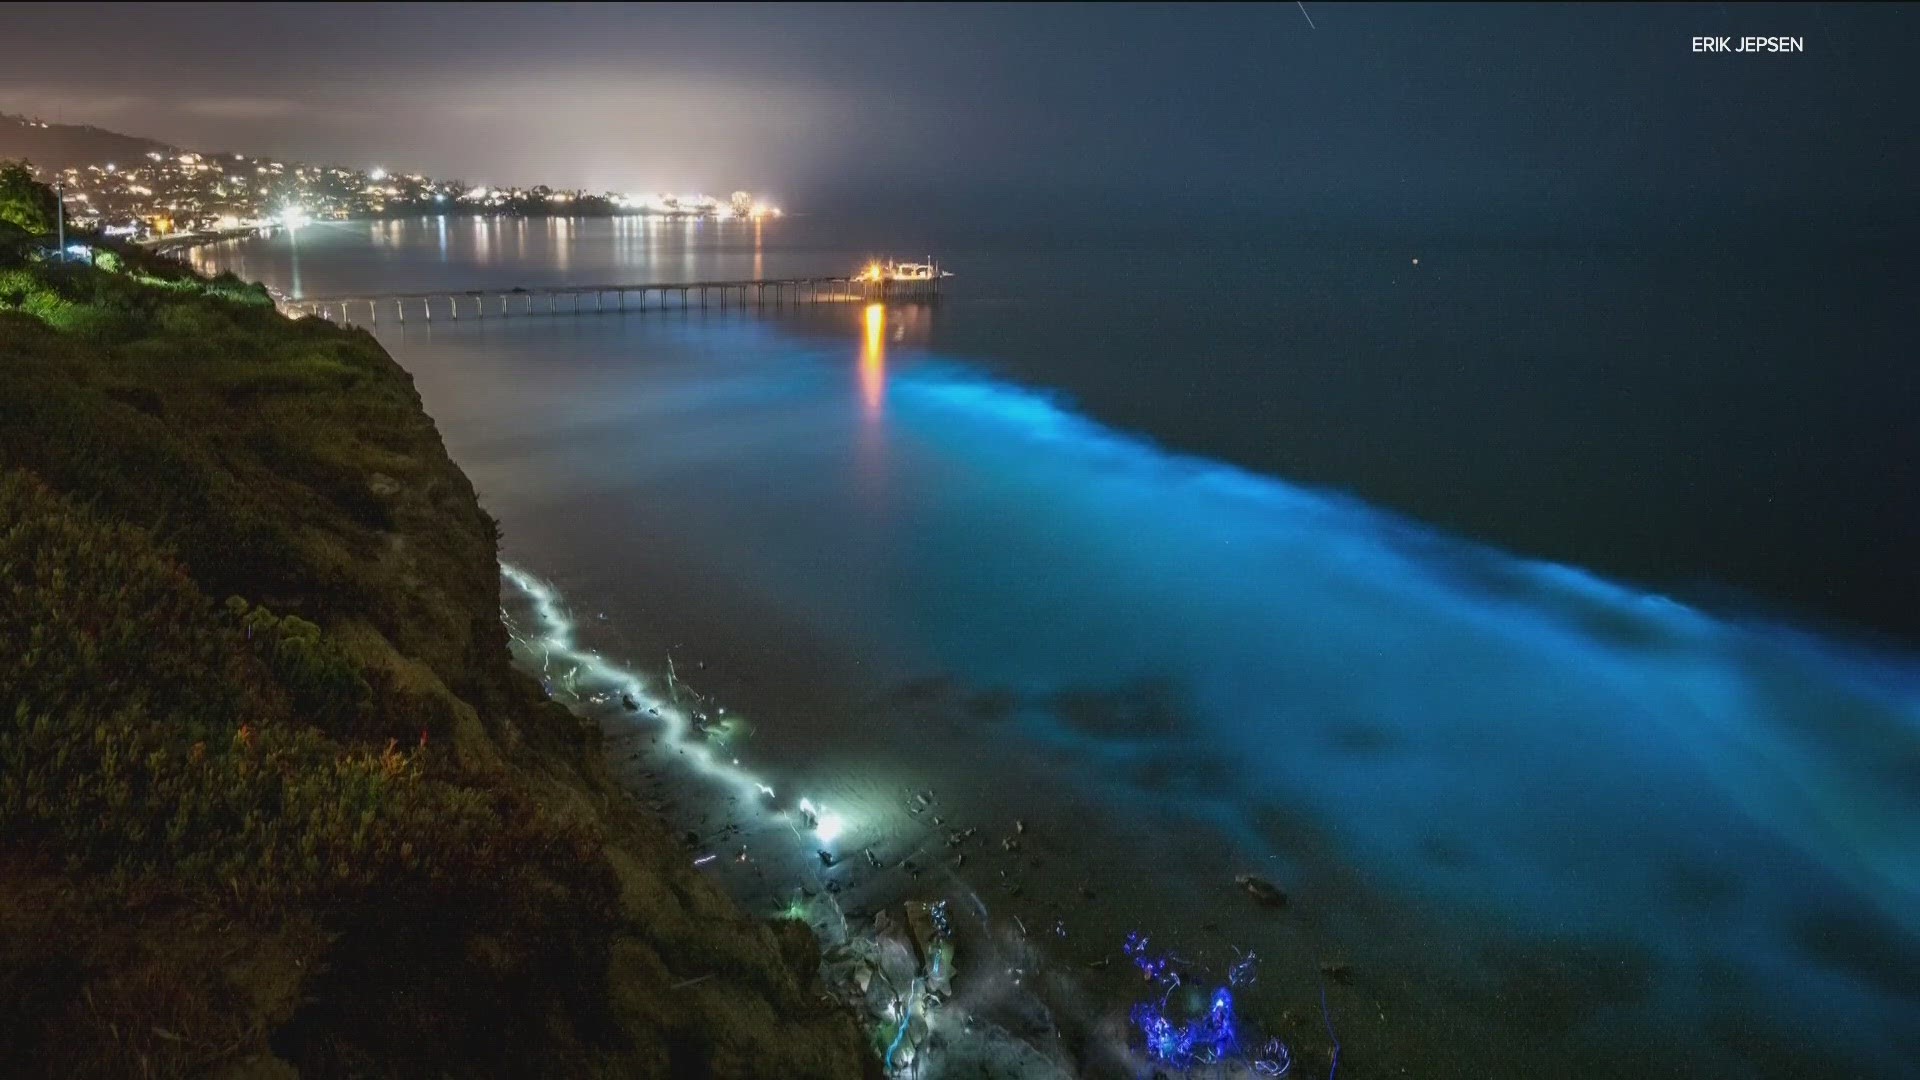 The reason behind the more frequent bioluminescence sightings is something researchers at Scripps Institution of Oceanography are looking into.